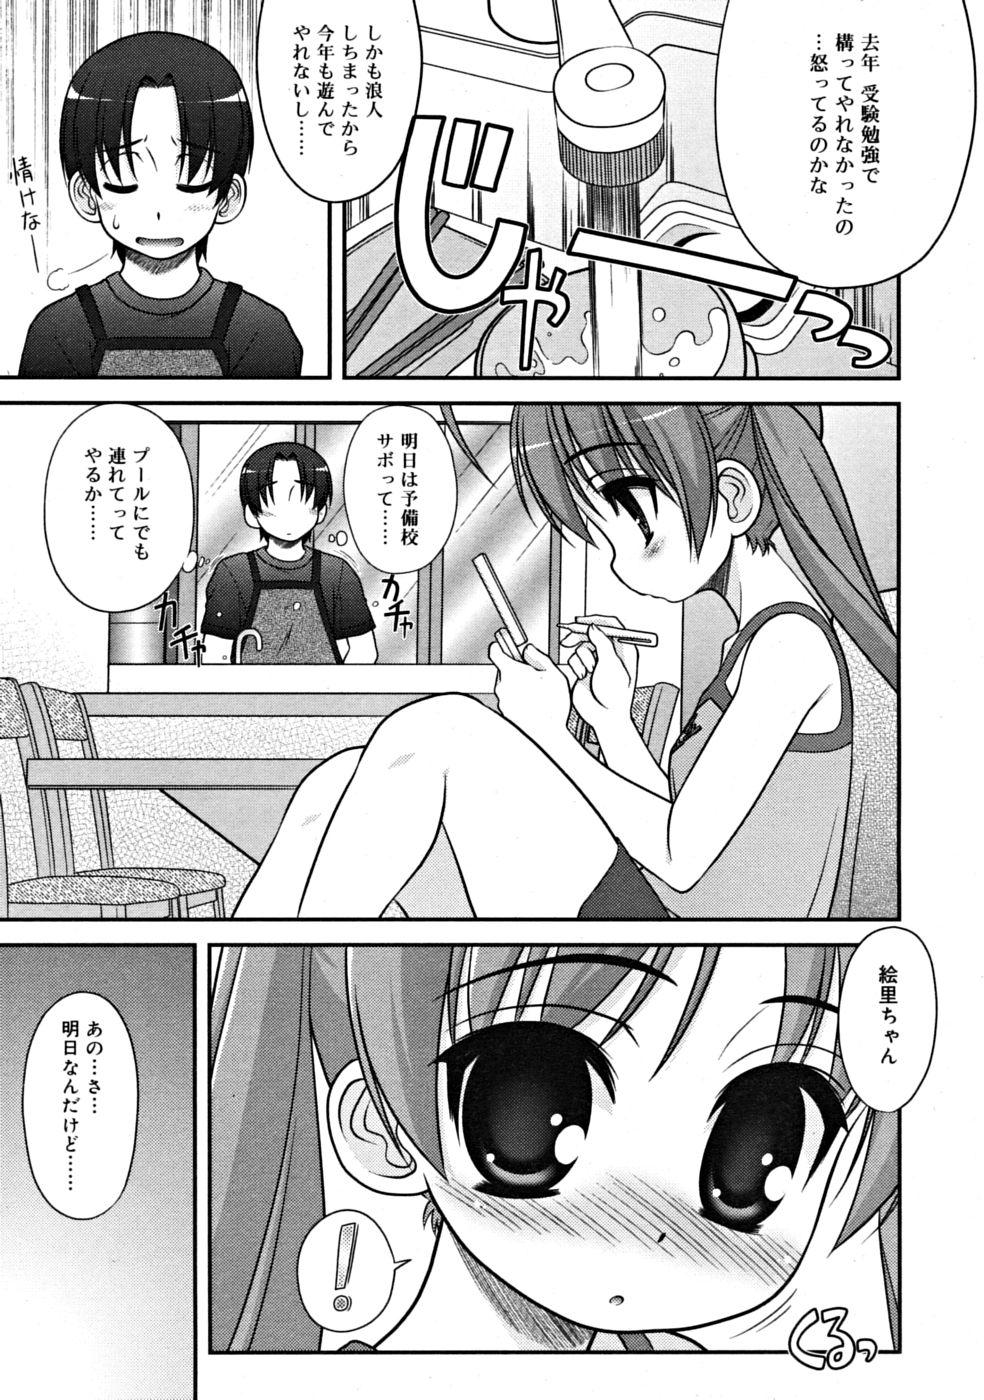 COMIC RiN 2008-09 page 25 full